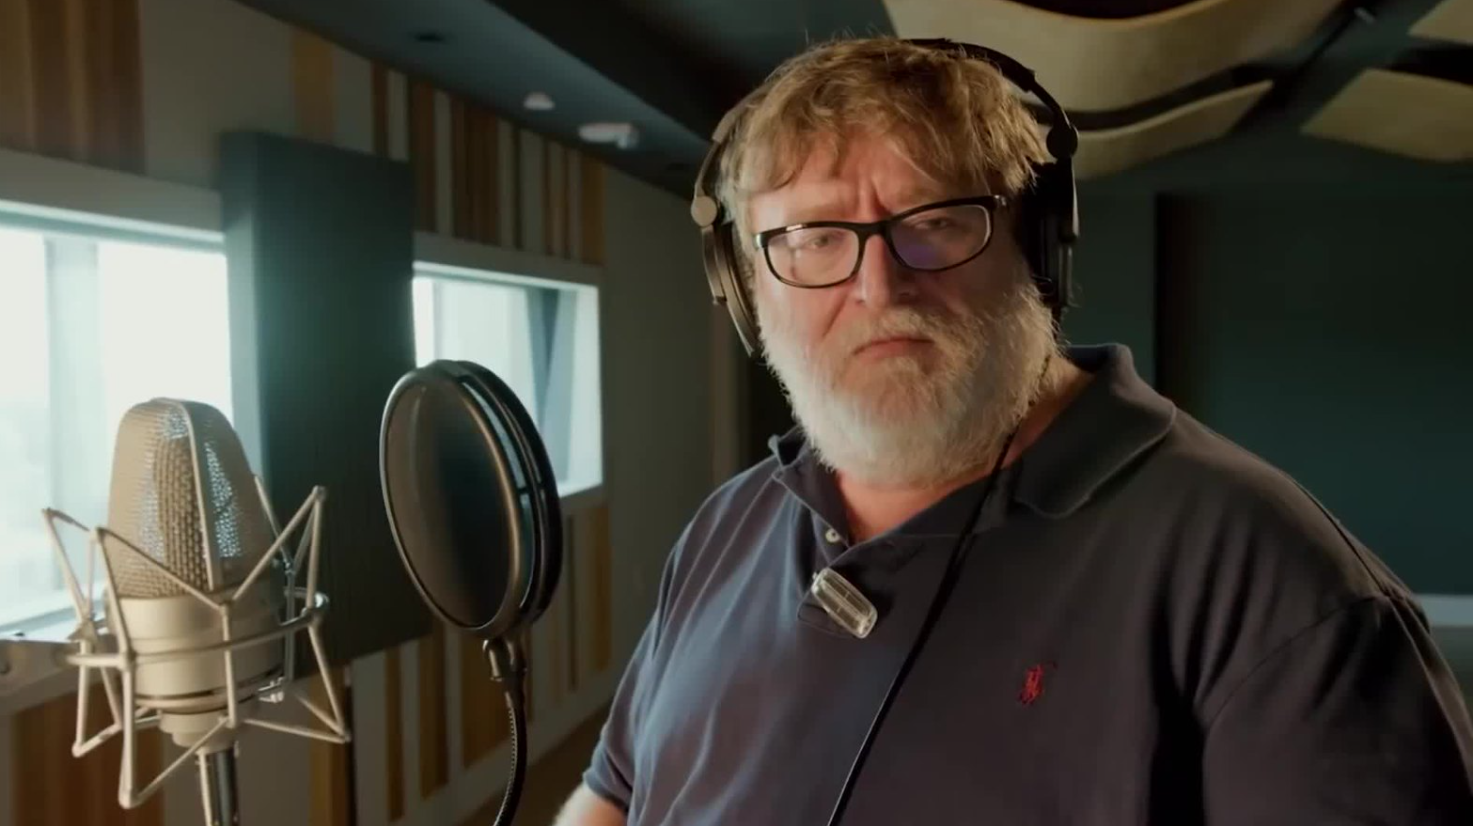 Consolidation in games must “create value for customers,” says Gabe Newell thumbnail